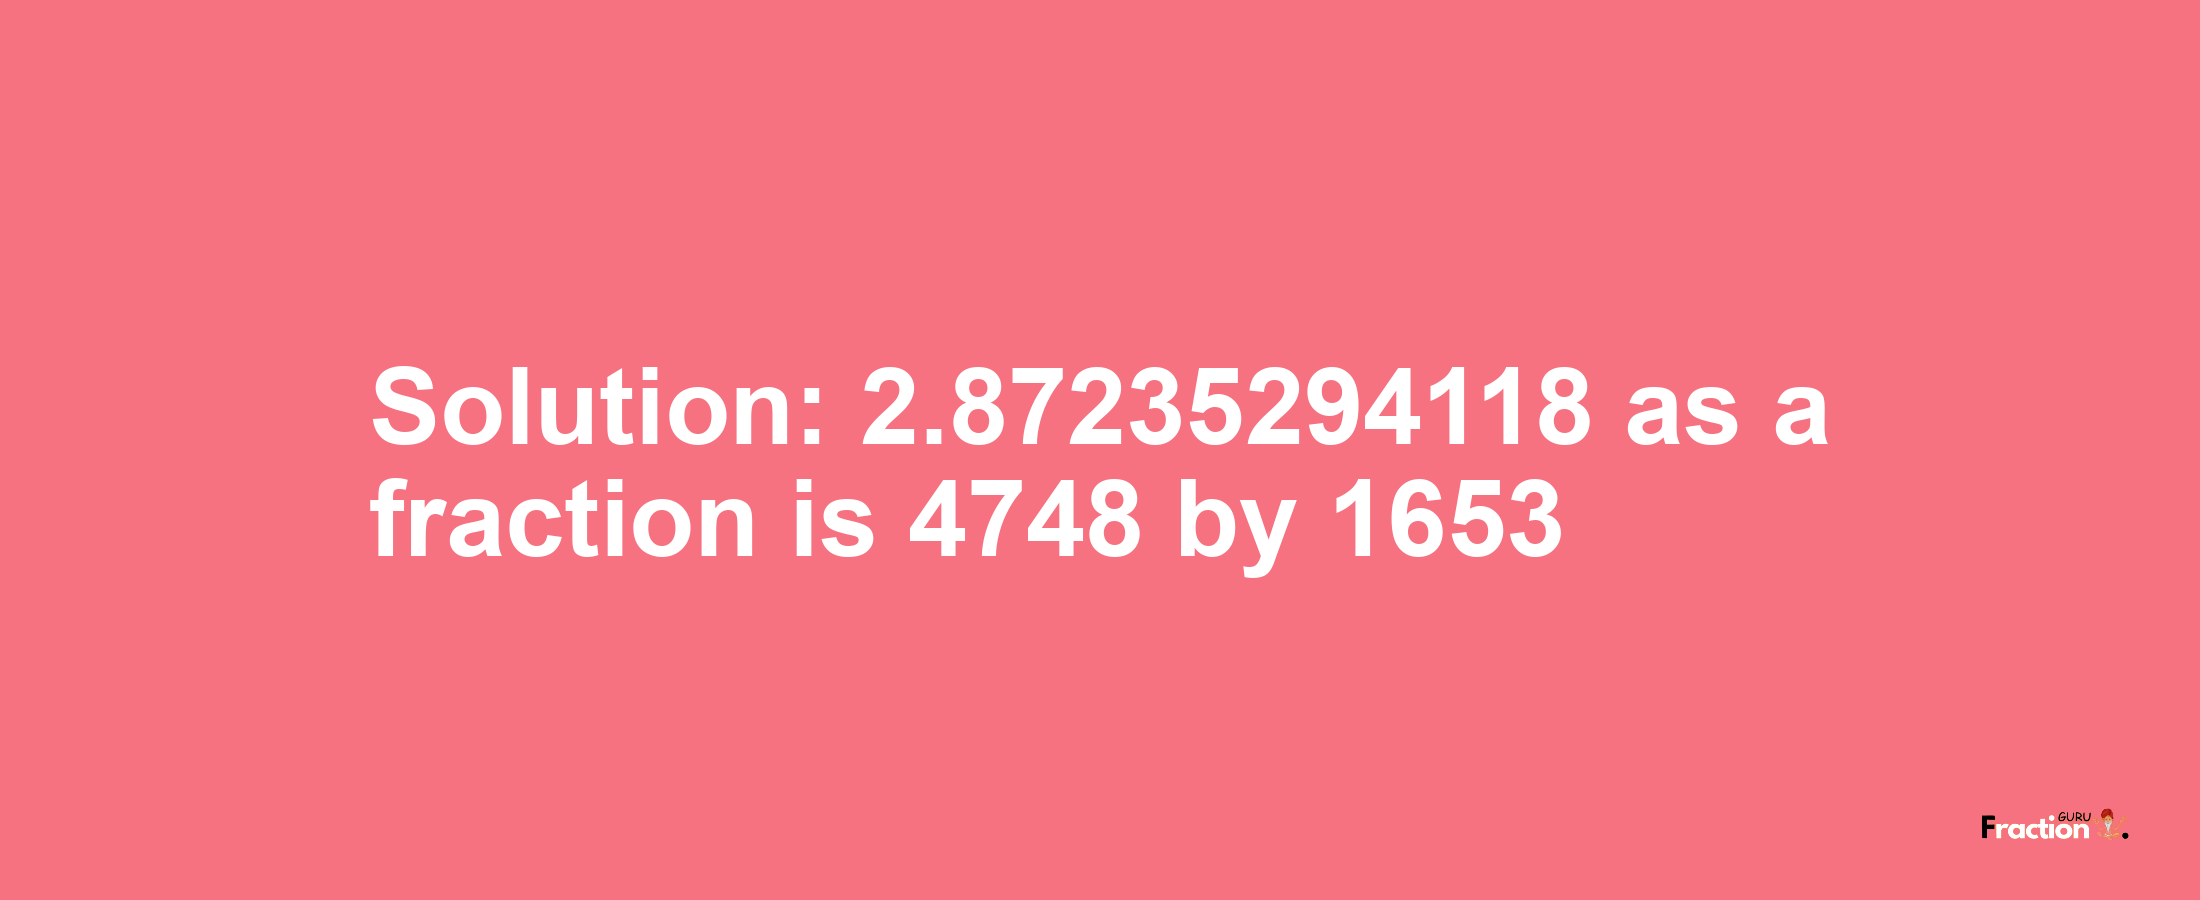 Solution:2.87235294118 as a fraction is 4748/1653